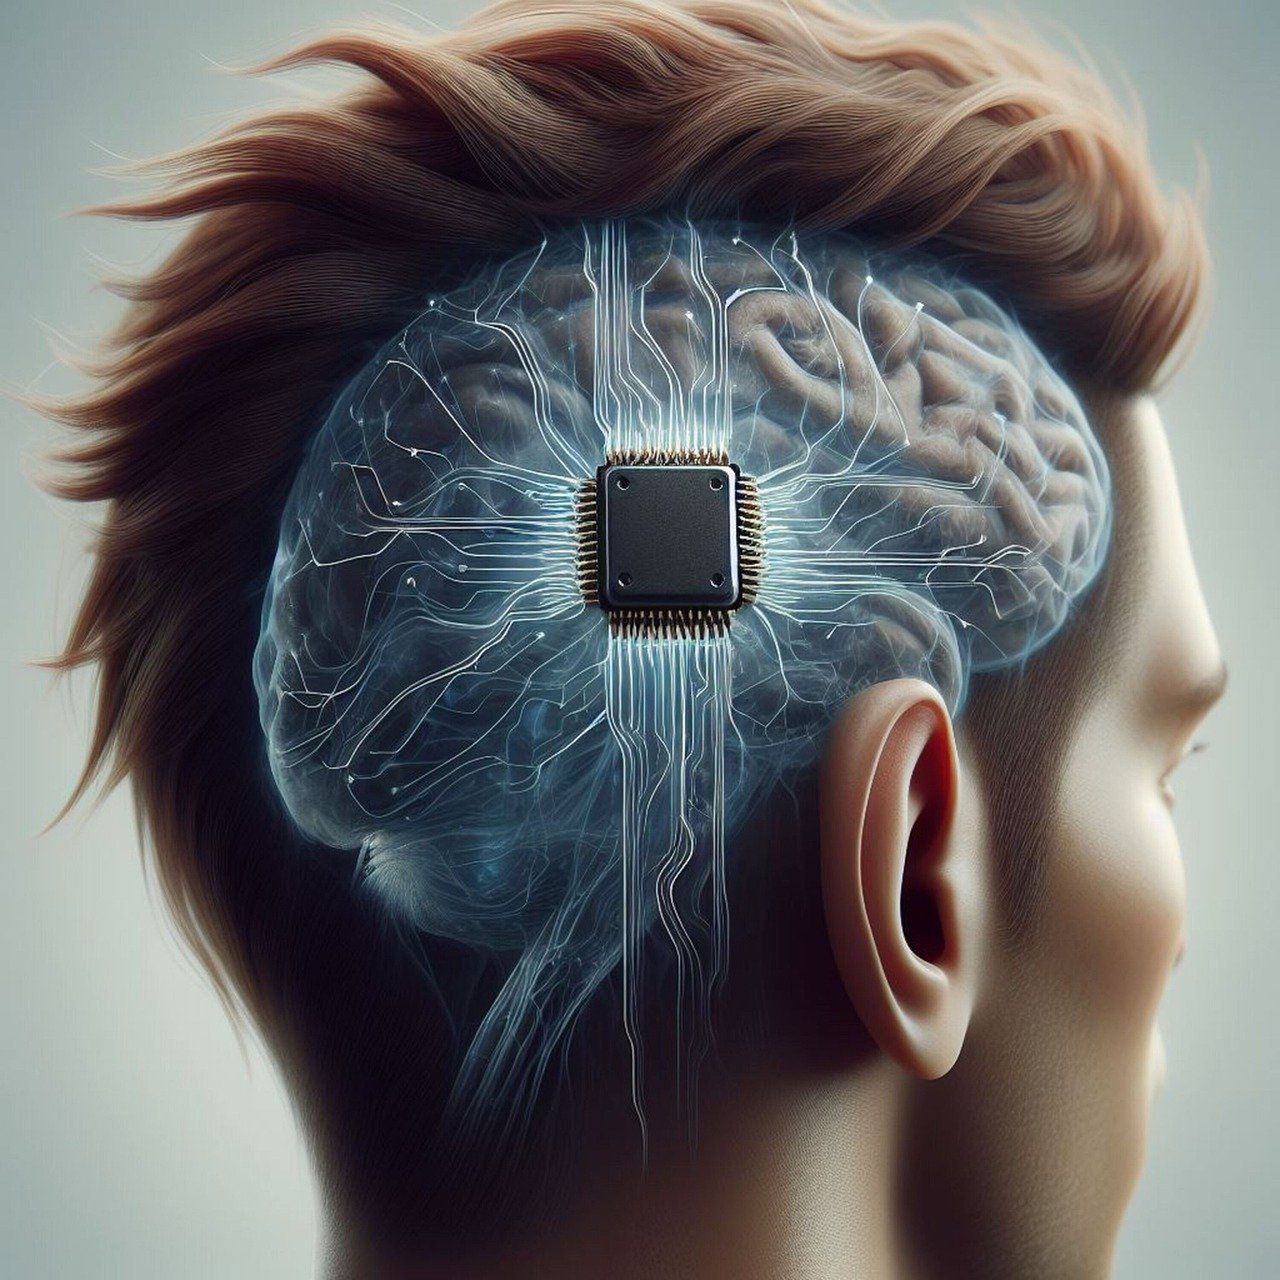 Neuralink's brain implant shows promise amidst challenges and FDA scrutiny